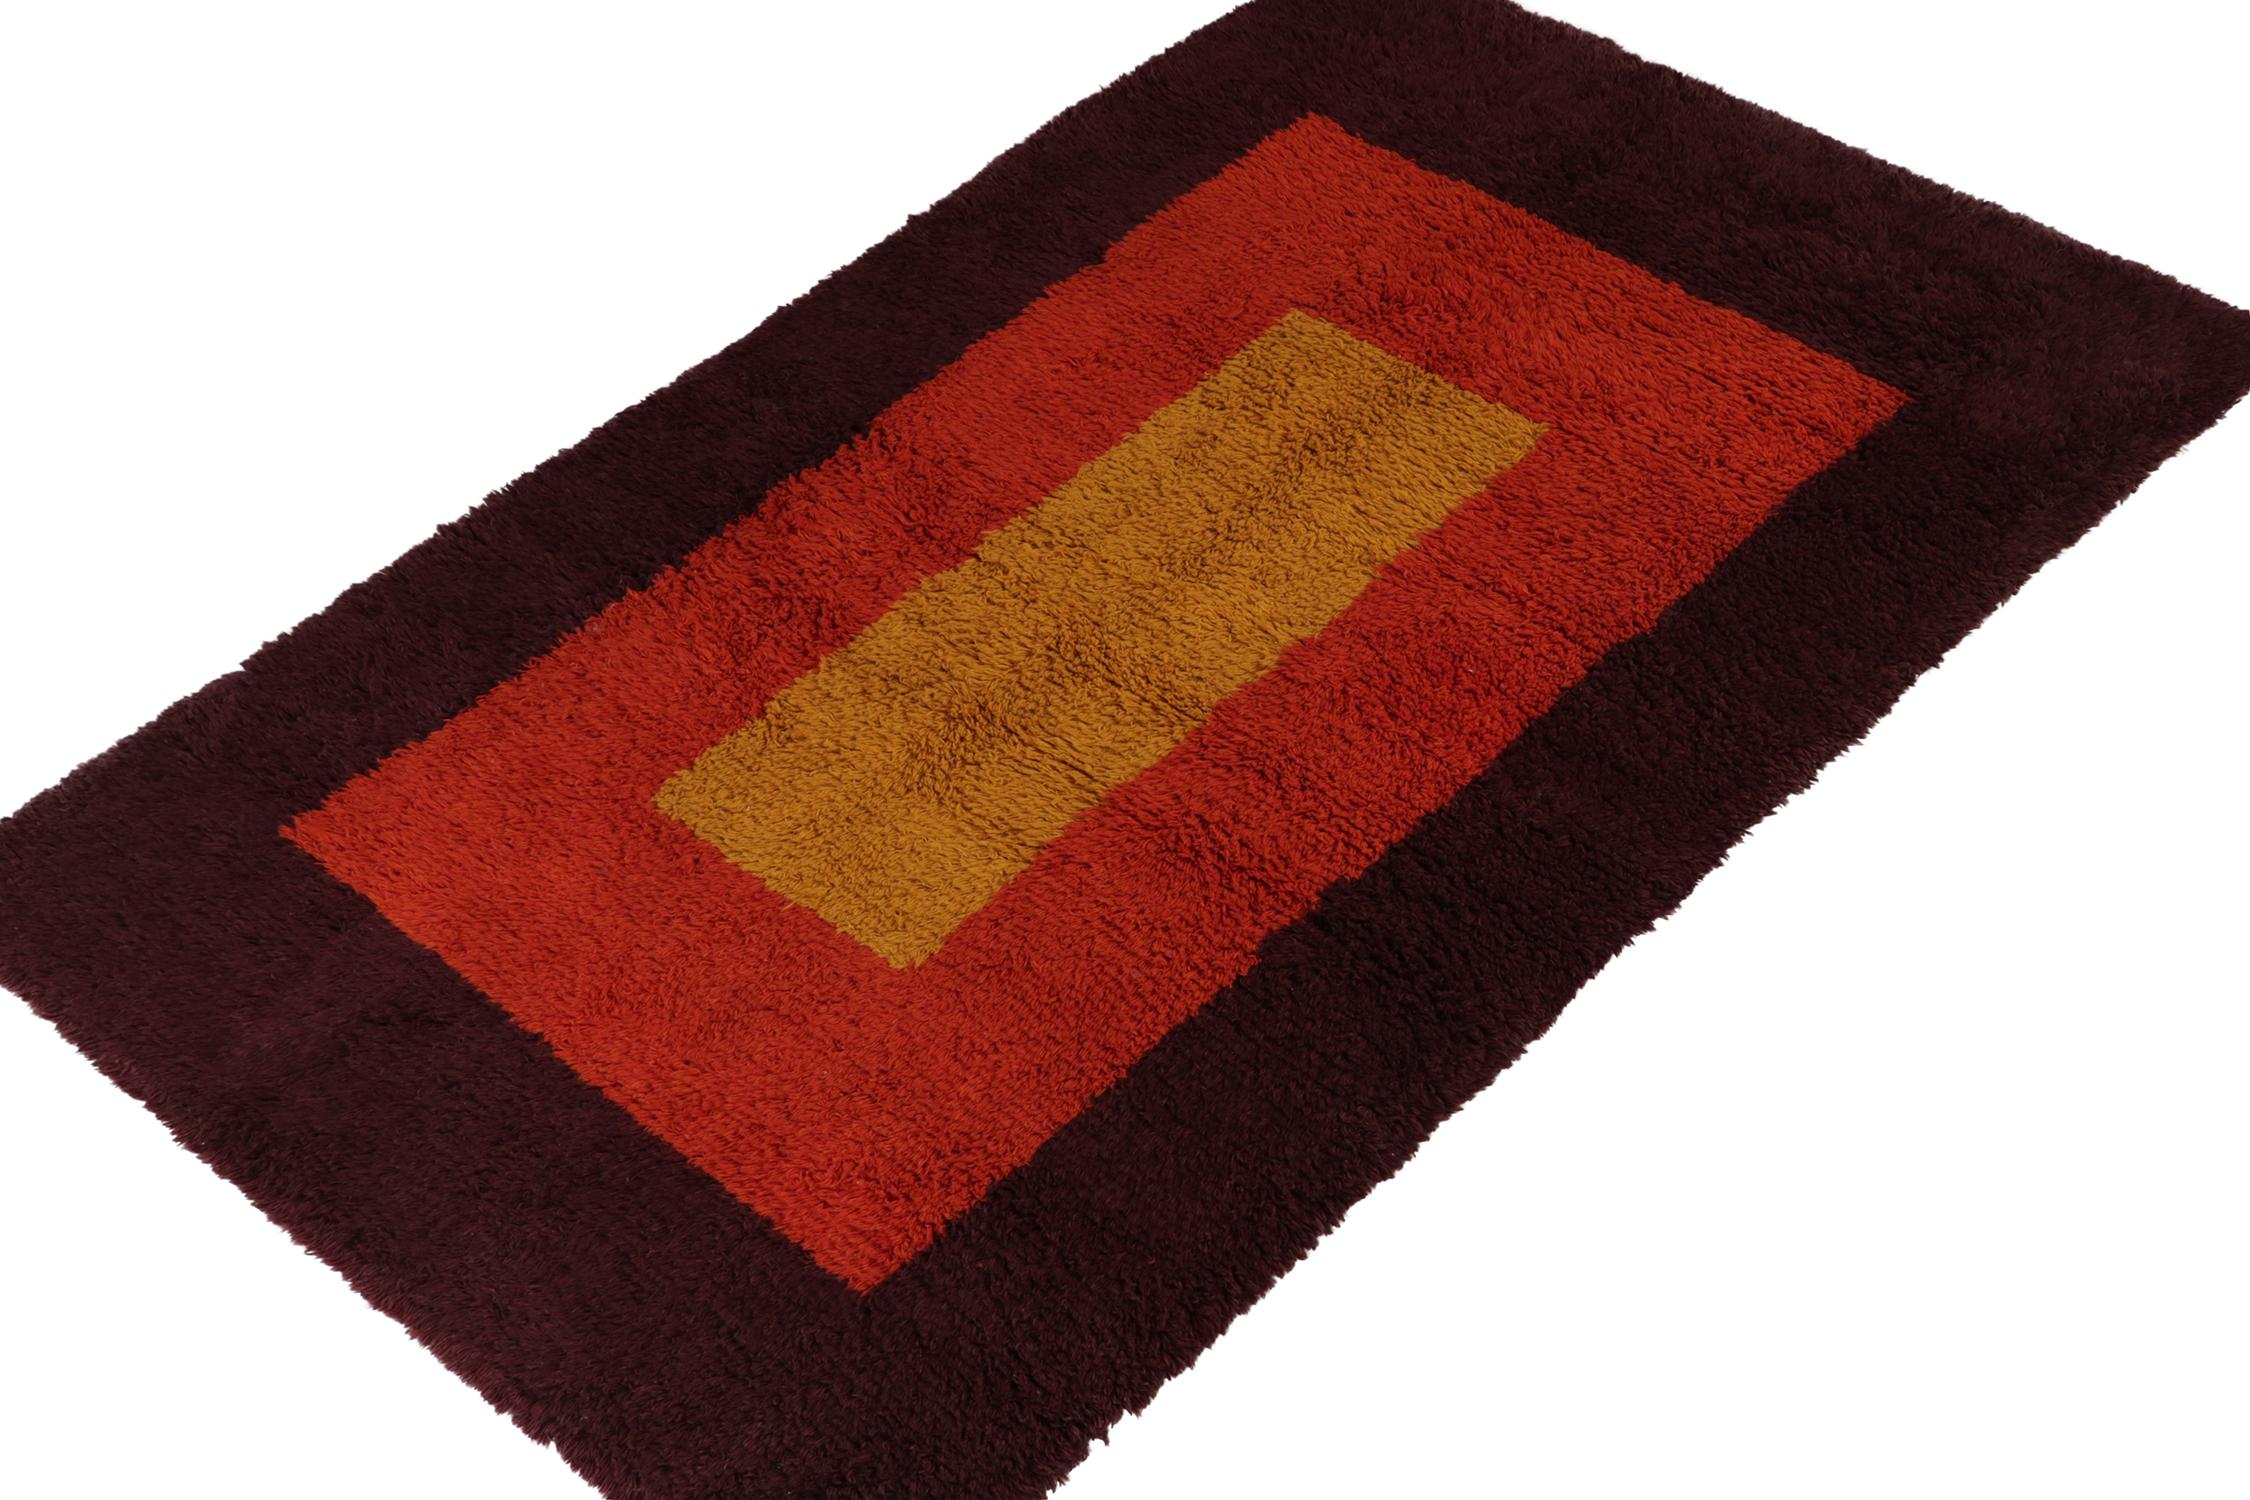 This vintage 5x8 Tulu rug is from the latest rare entries in Rug & Kilim’s mid-century tribal curations. Hand-knotted in wool from Turkey circa 1950-1960.

Further on the design:

This curation exemplifies the rare, minimal designs and emphasis